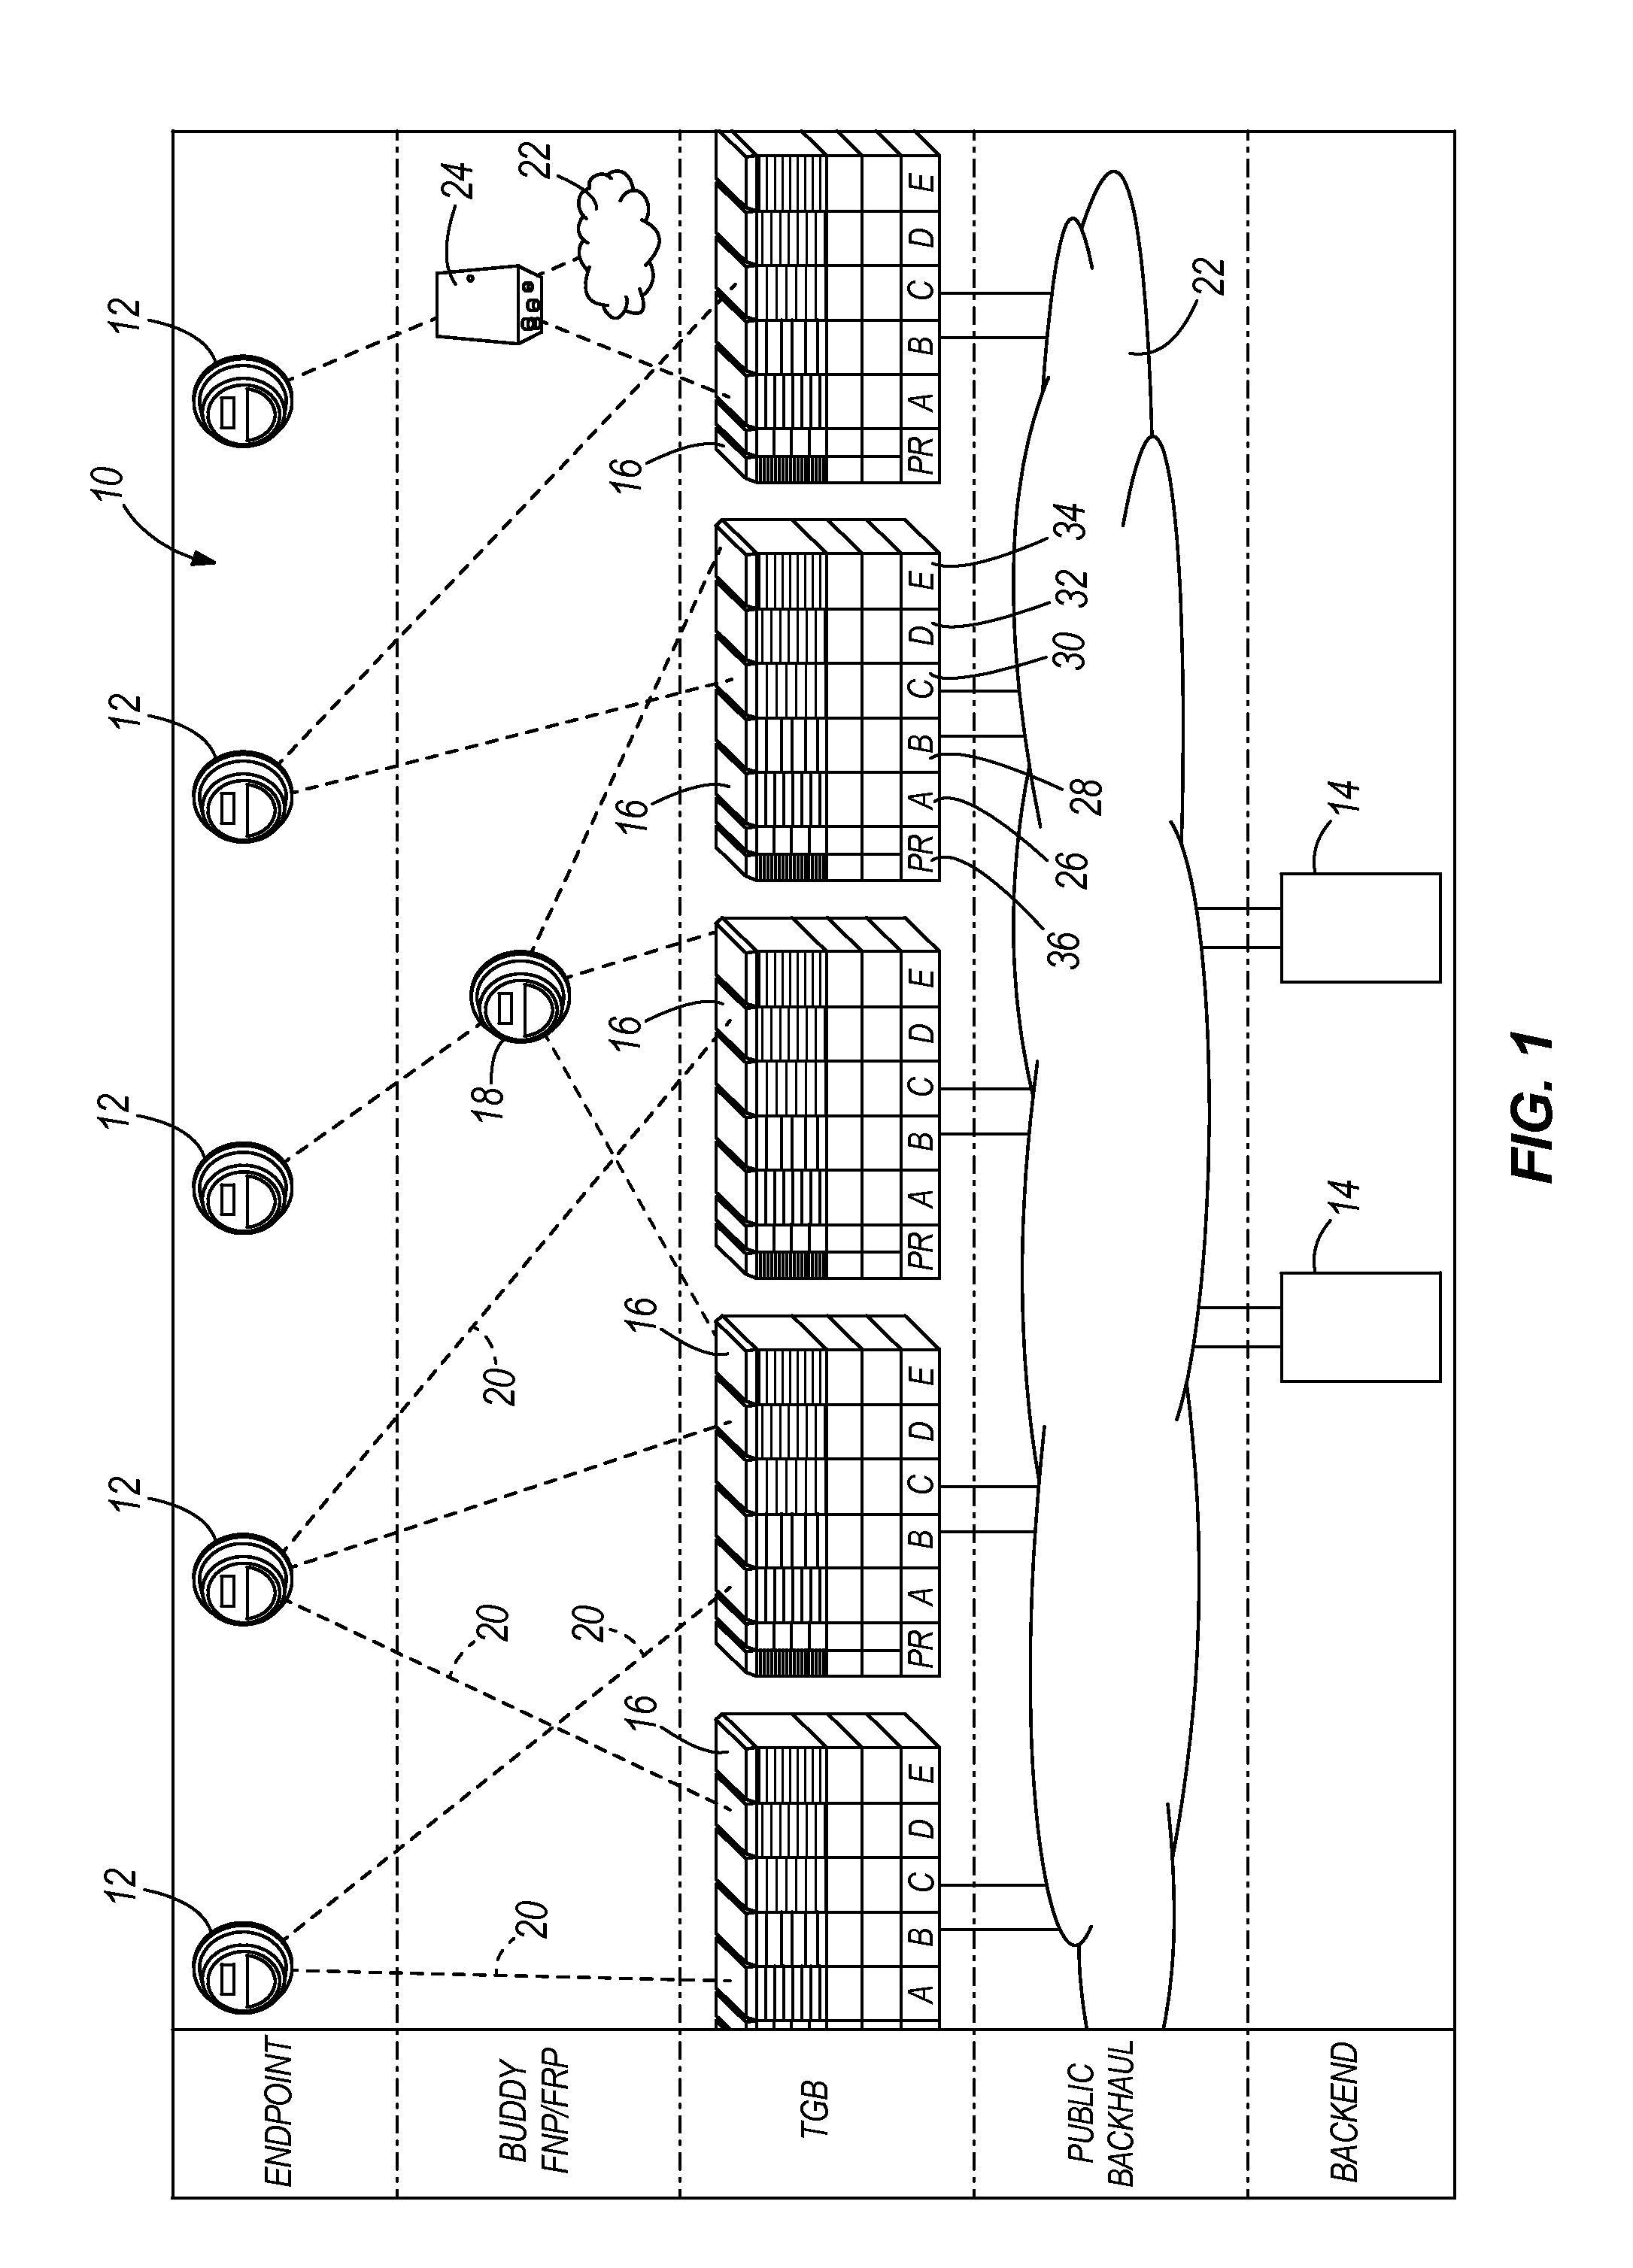 Multi-band channel capacity for meter network